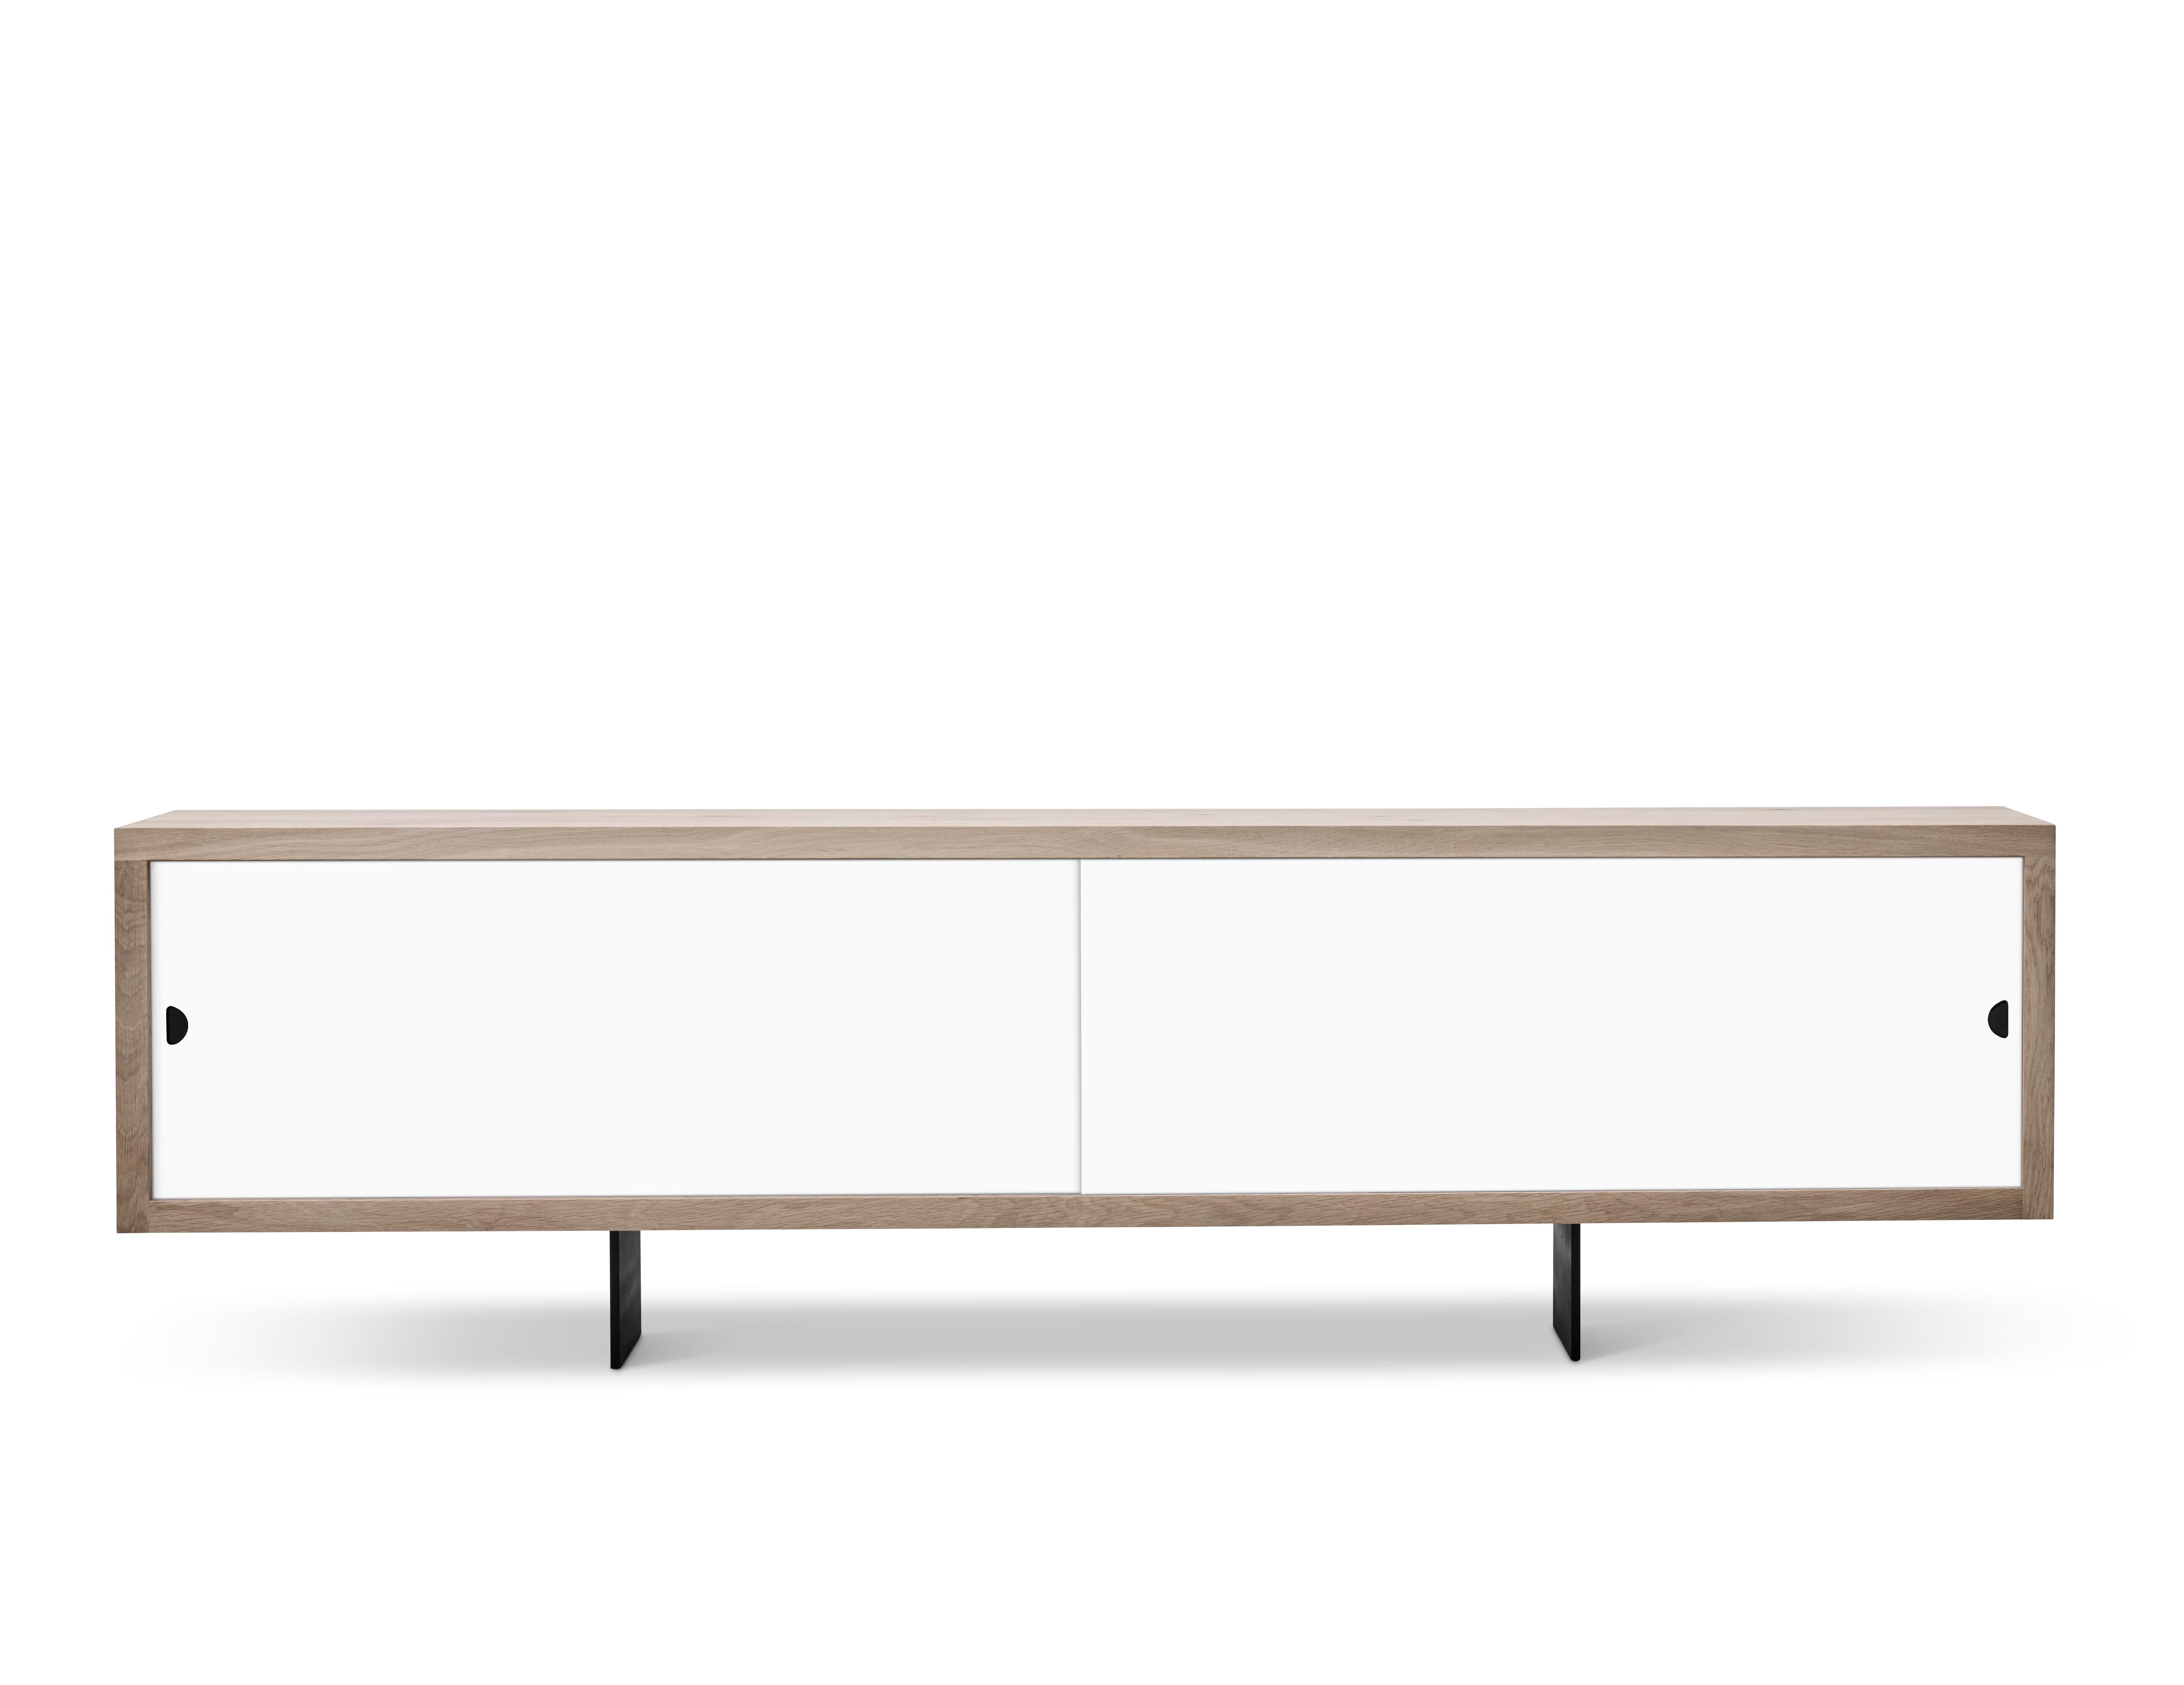 Grand sideboard by Jacob Plejdrup for DK3, 2016

Sideboard with sliding doors, available in castoro, beige, black or white.
Dimensions: H 68 x 50 x 240

---
Dk3 is known for the large plank tables, so it was obvious for designer and dk3